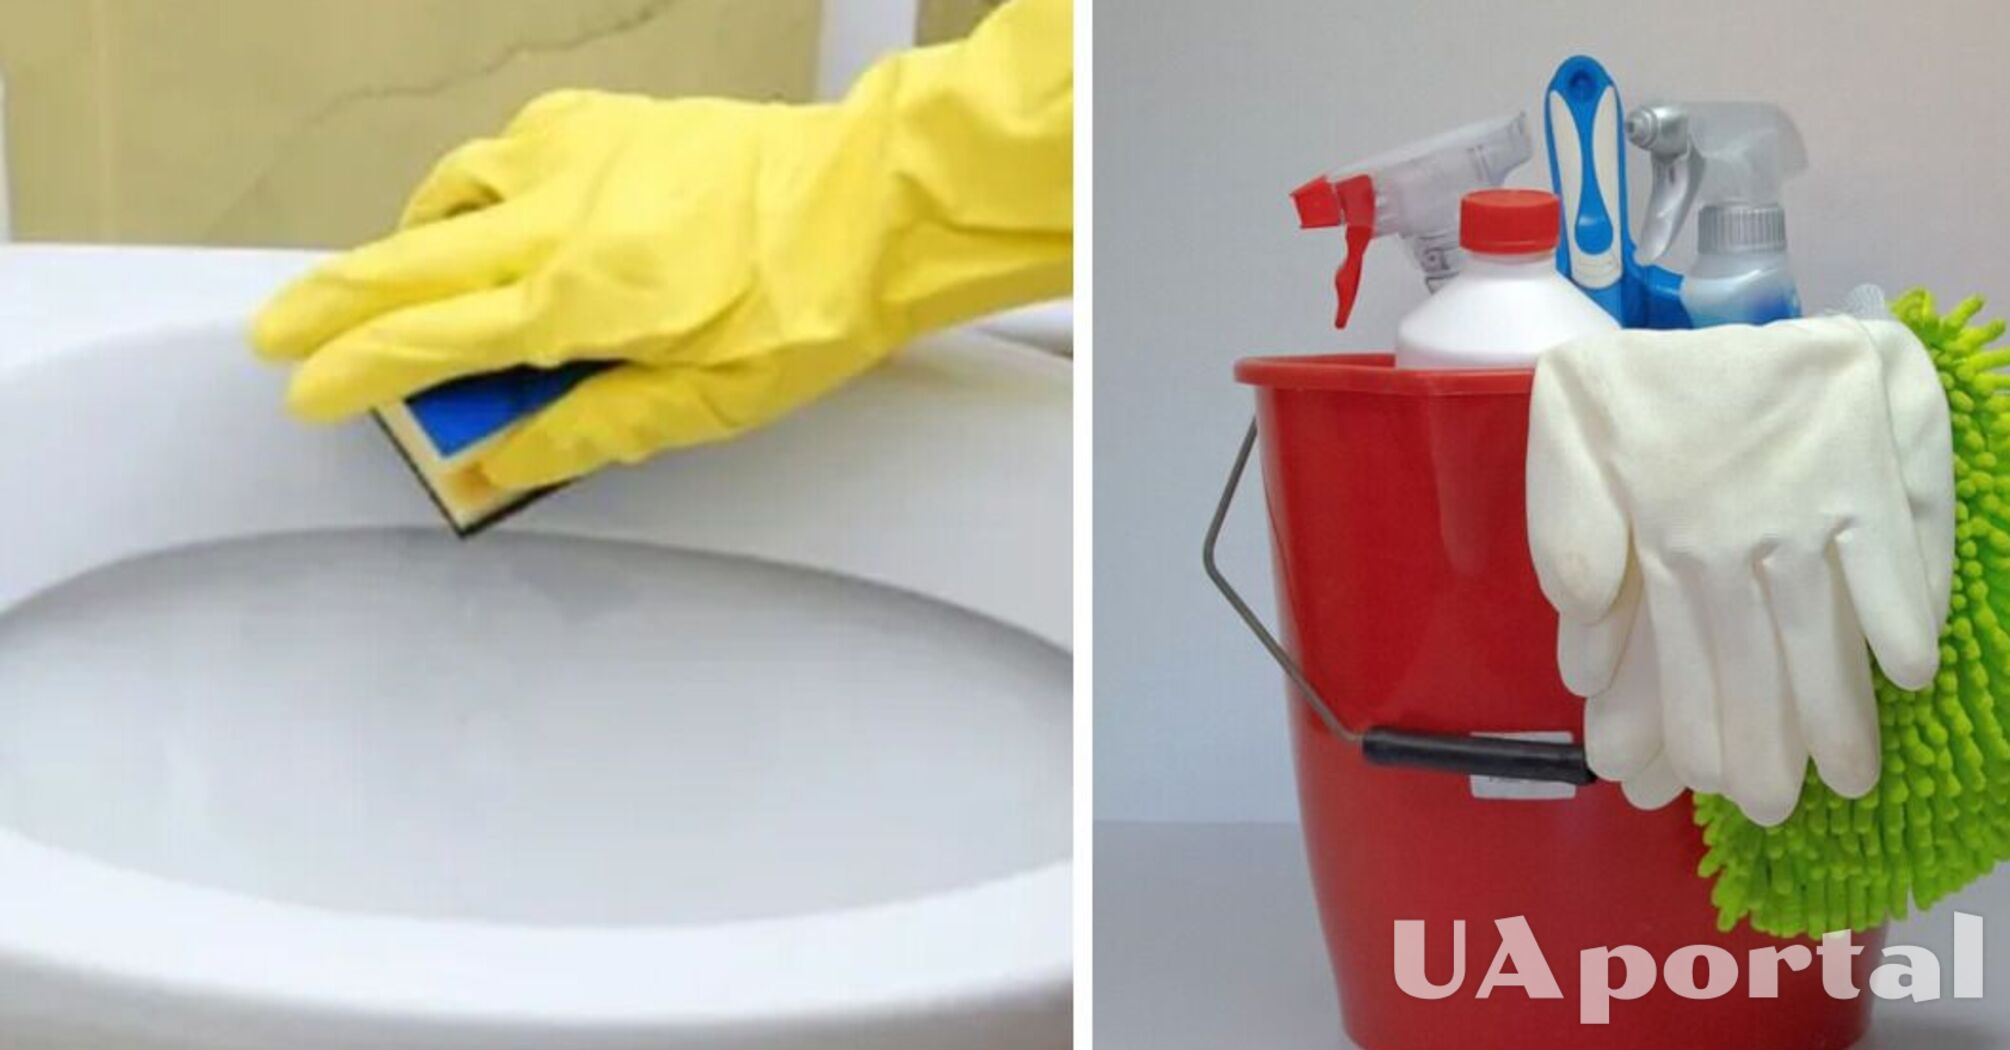 Experts explain how to easily remove yellow stains from a toilet seat